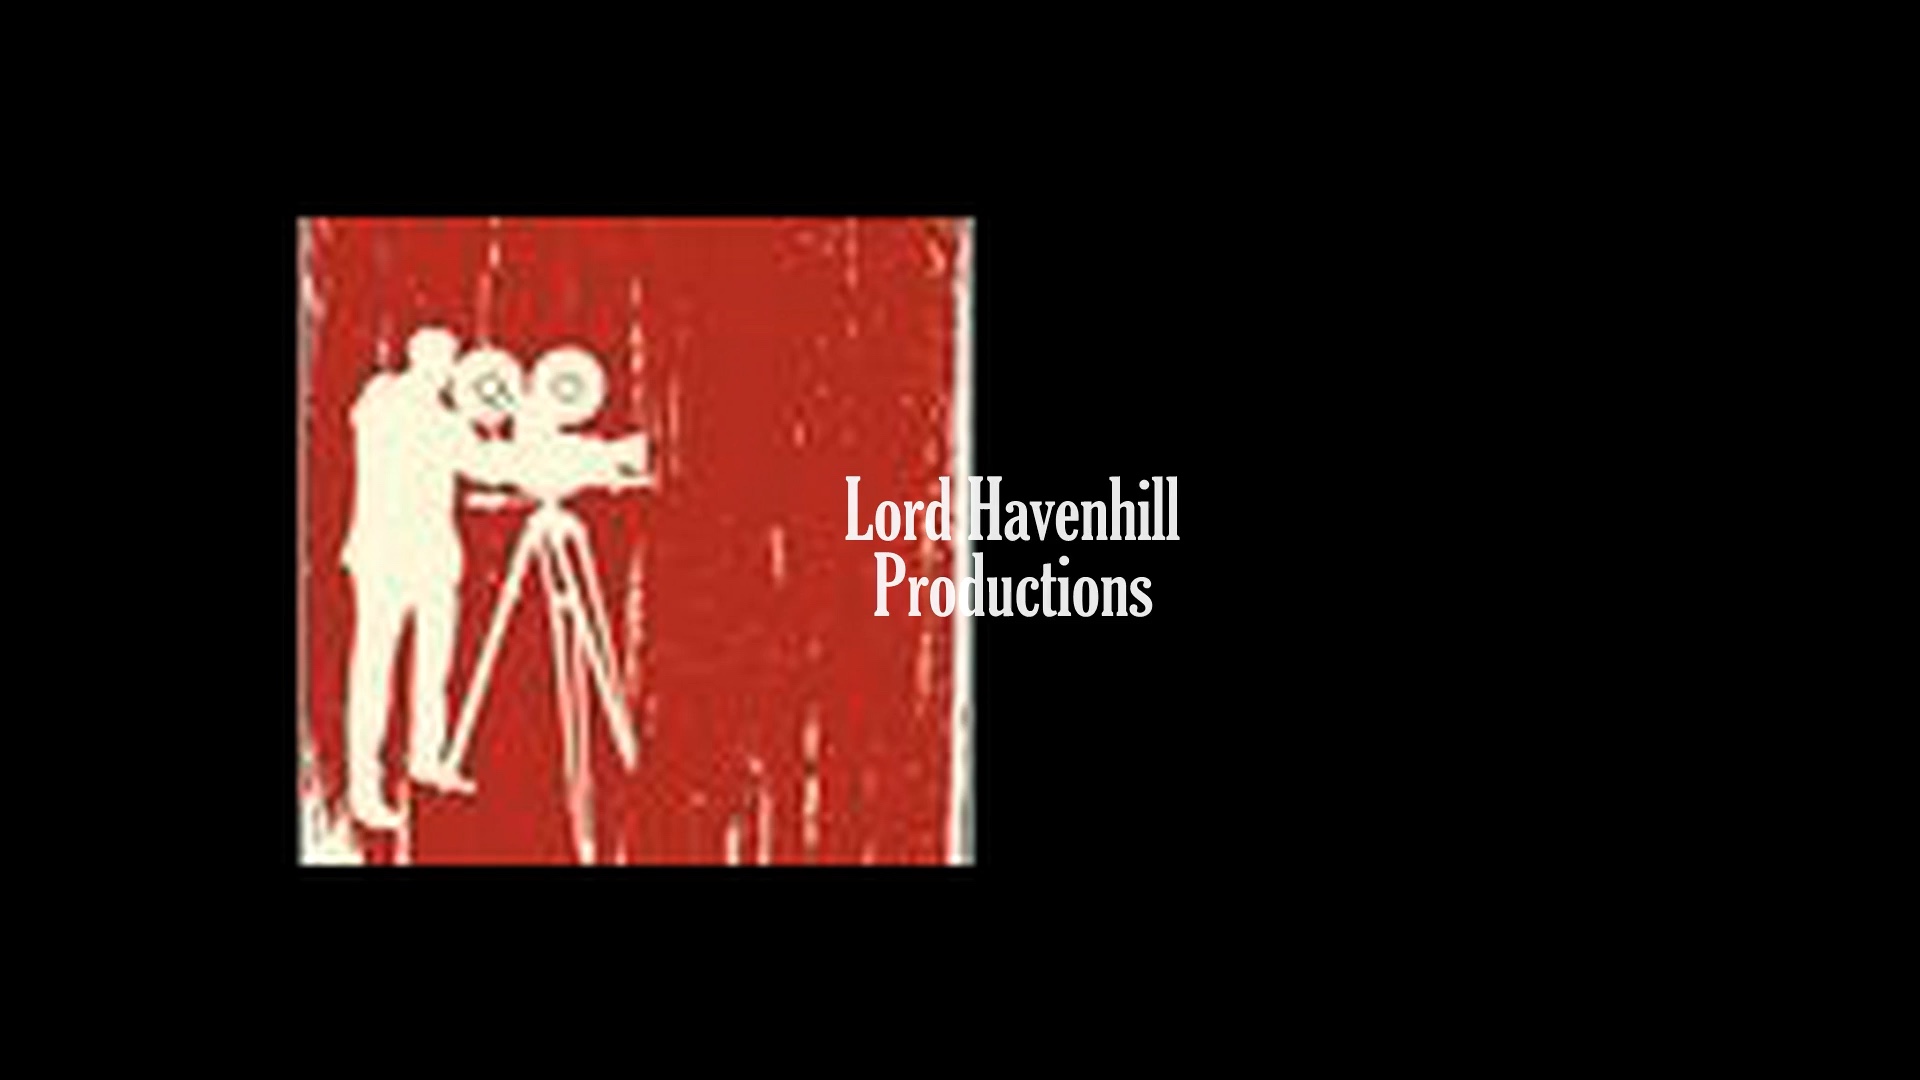 Lord Havenhill Productionsjpg